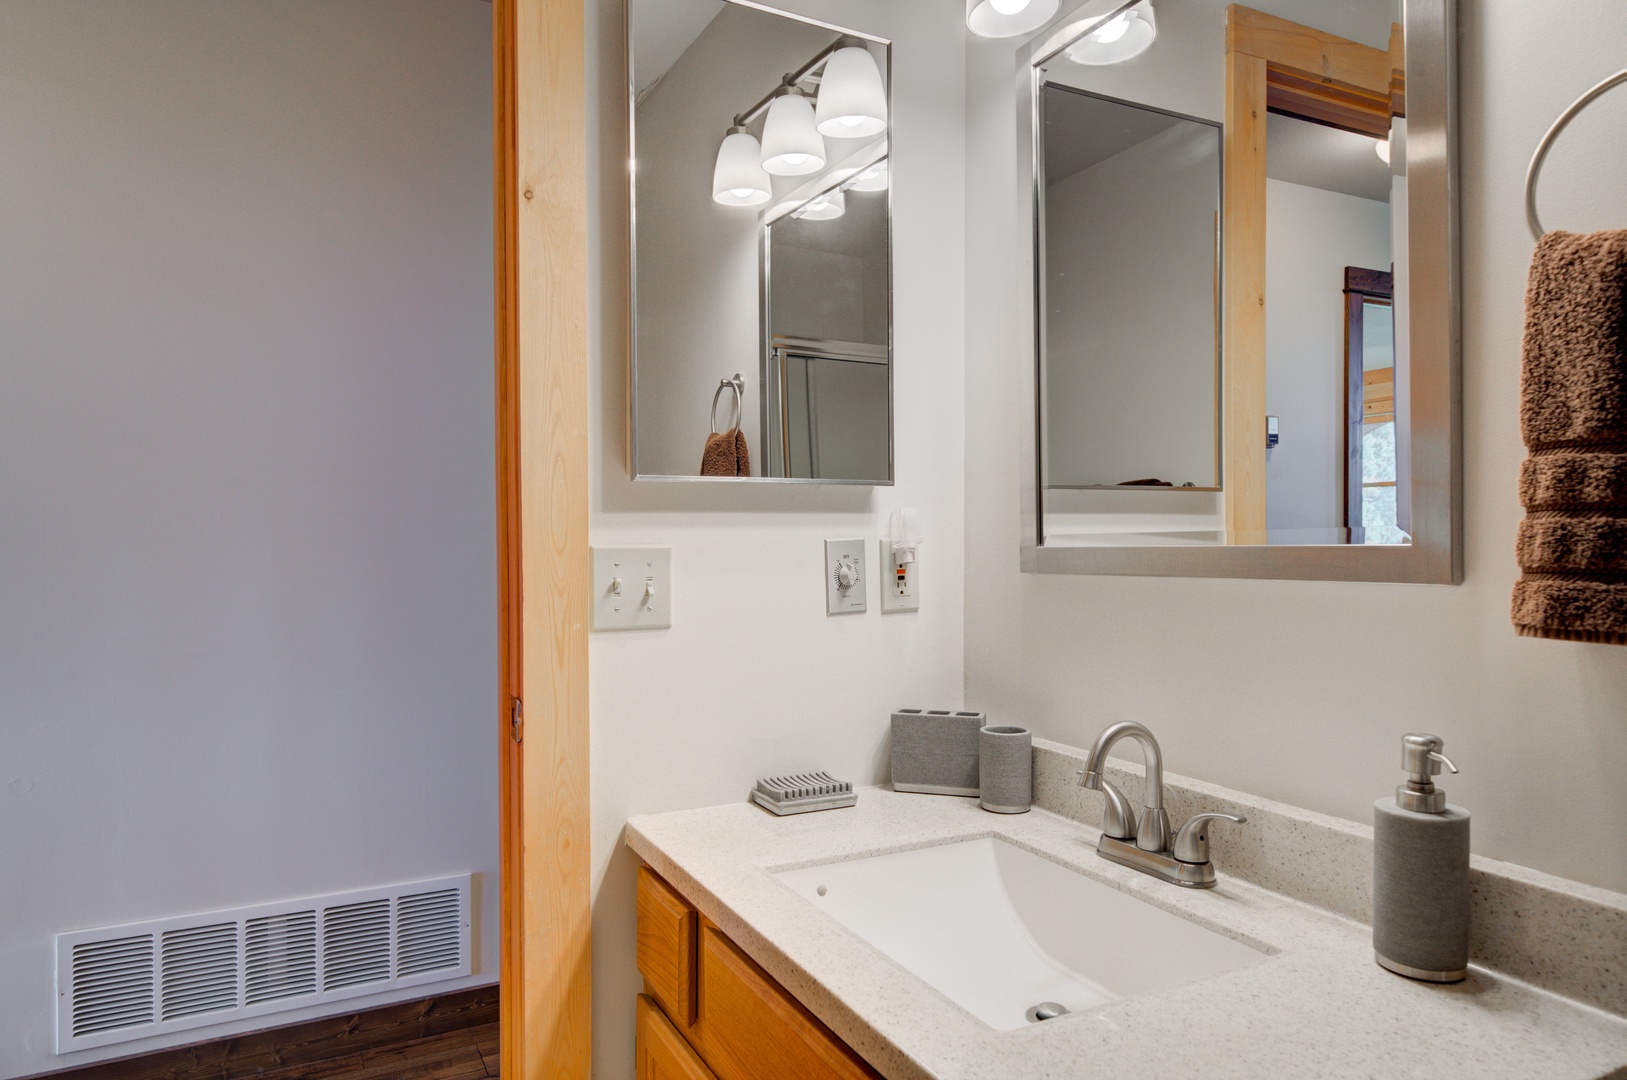 Bozeman Vacation Rentals, The Canyon Lookout - Guest bath with storage and updated fixtures